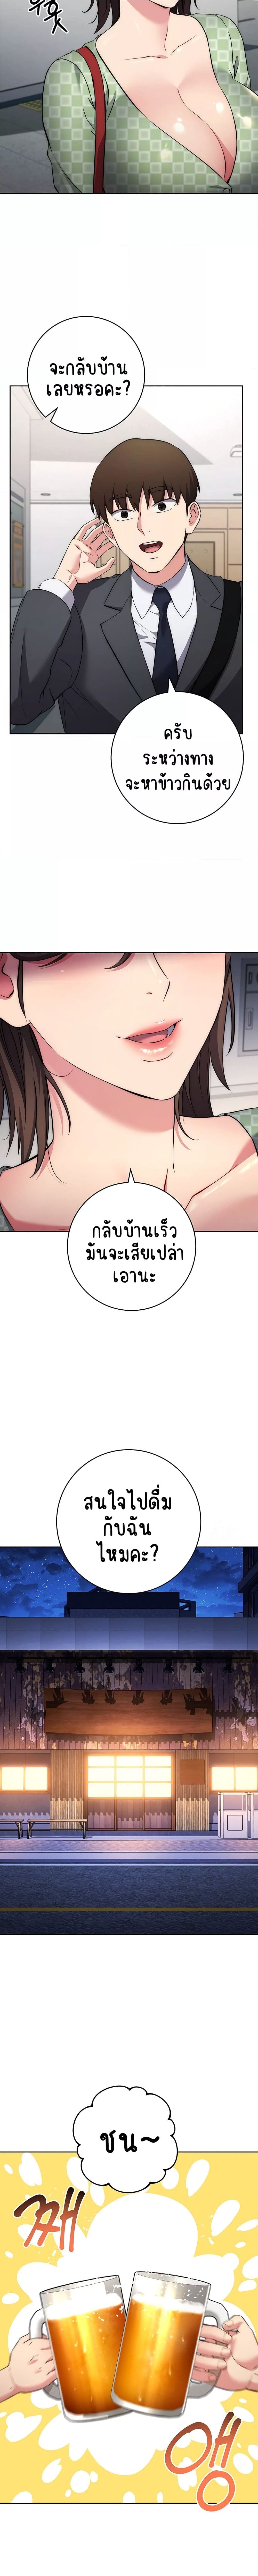 Outsider: The Invisible Man ตอนที่ 7 ภาพ 12